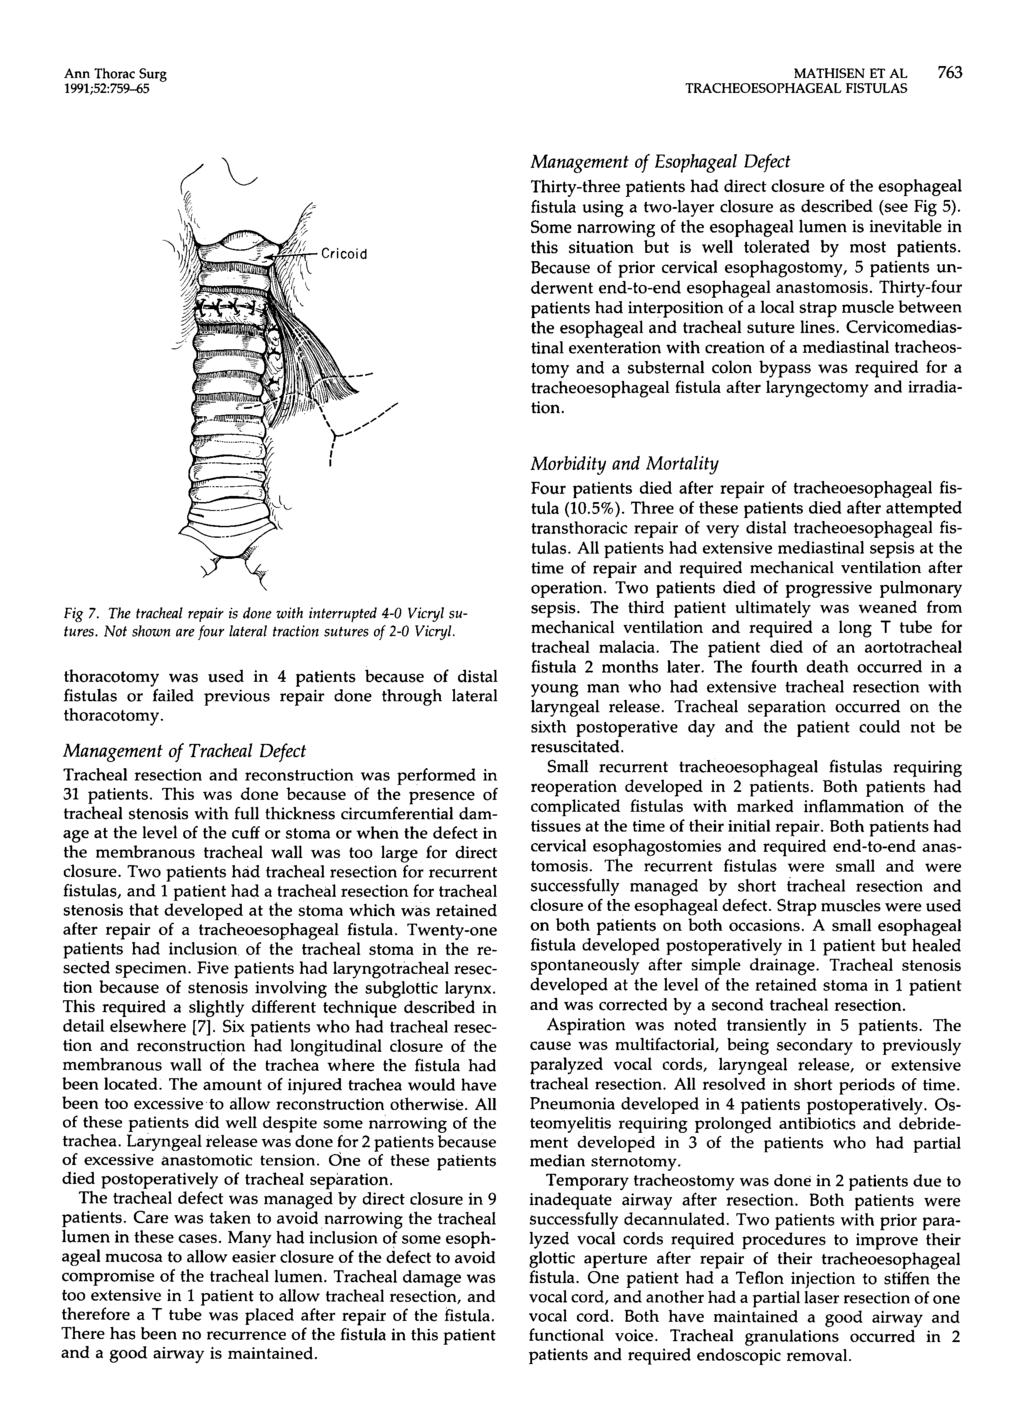 Ann Thorac Surg 1991;52759-65 MATHISEN ET AL 763, Management of Esophageal Defect Thirty-three patients had direct closure of the esophageal fistula using a two-layer closure as described (see Fig 5).